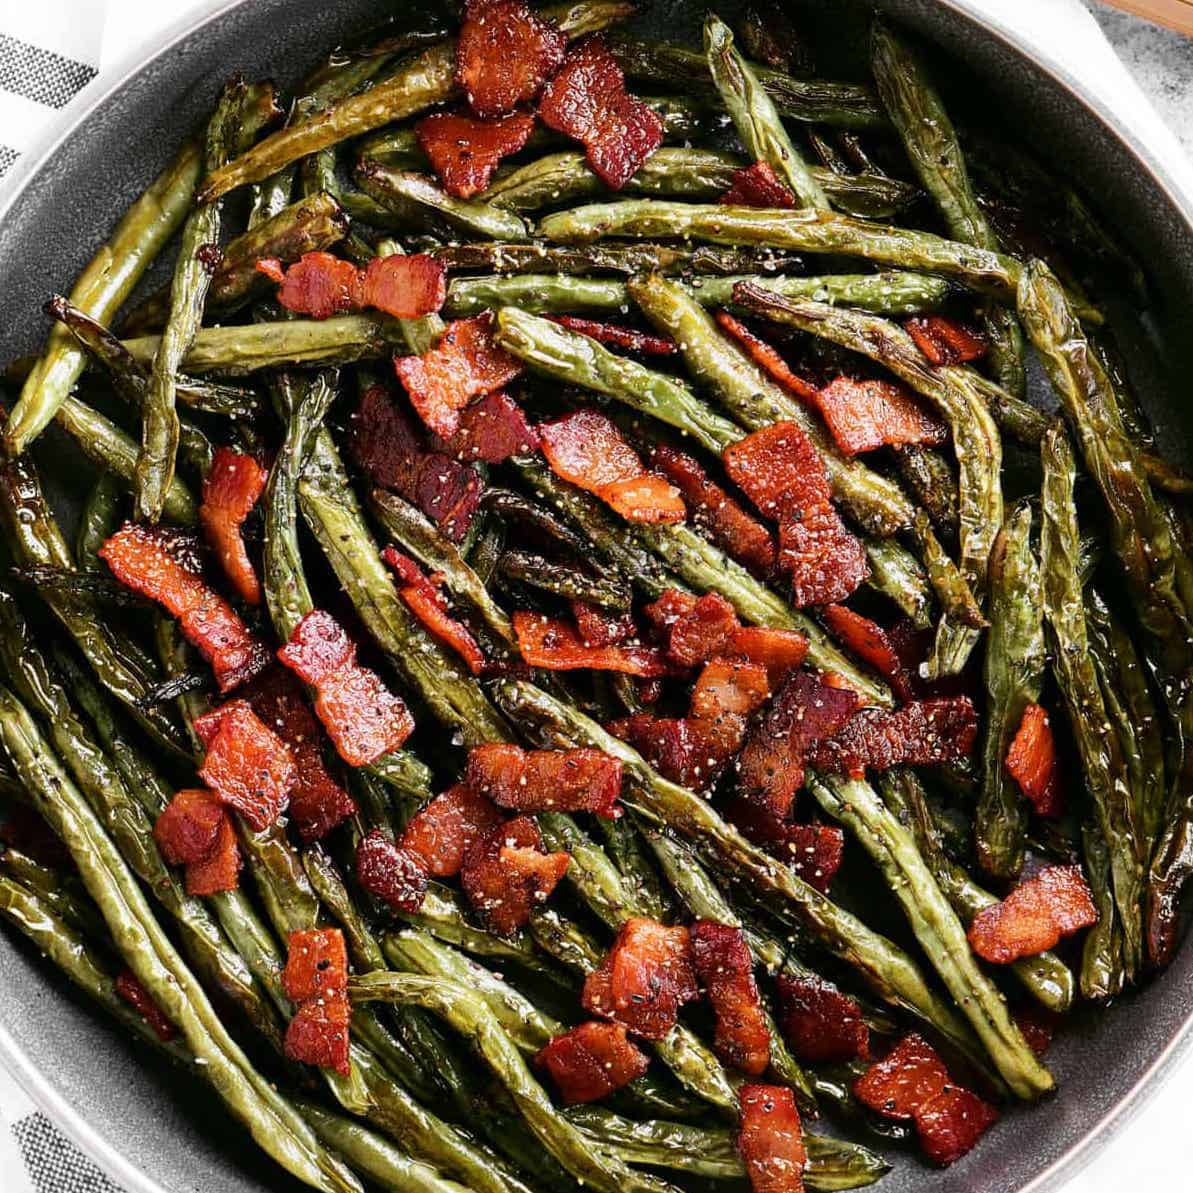 roasted green beans with bacon bits.